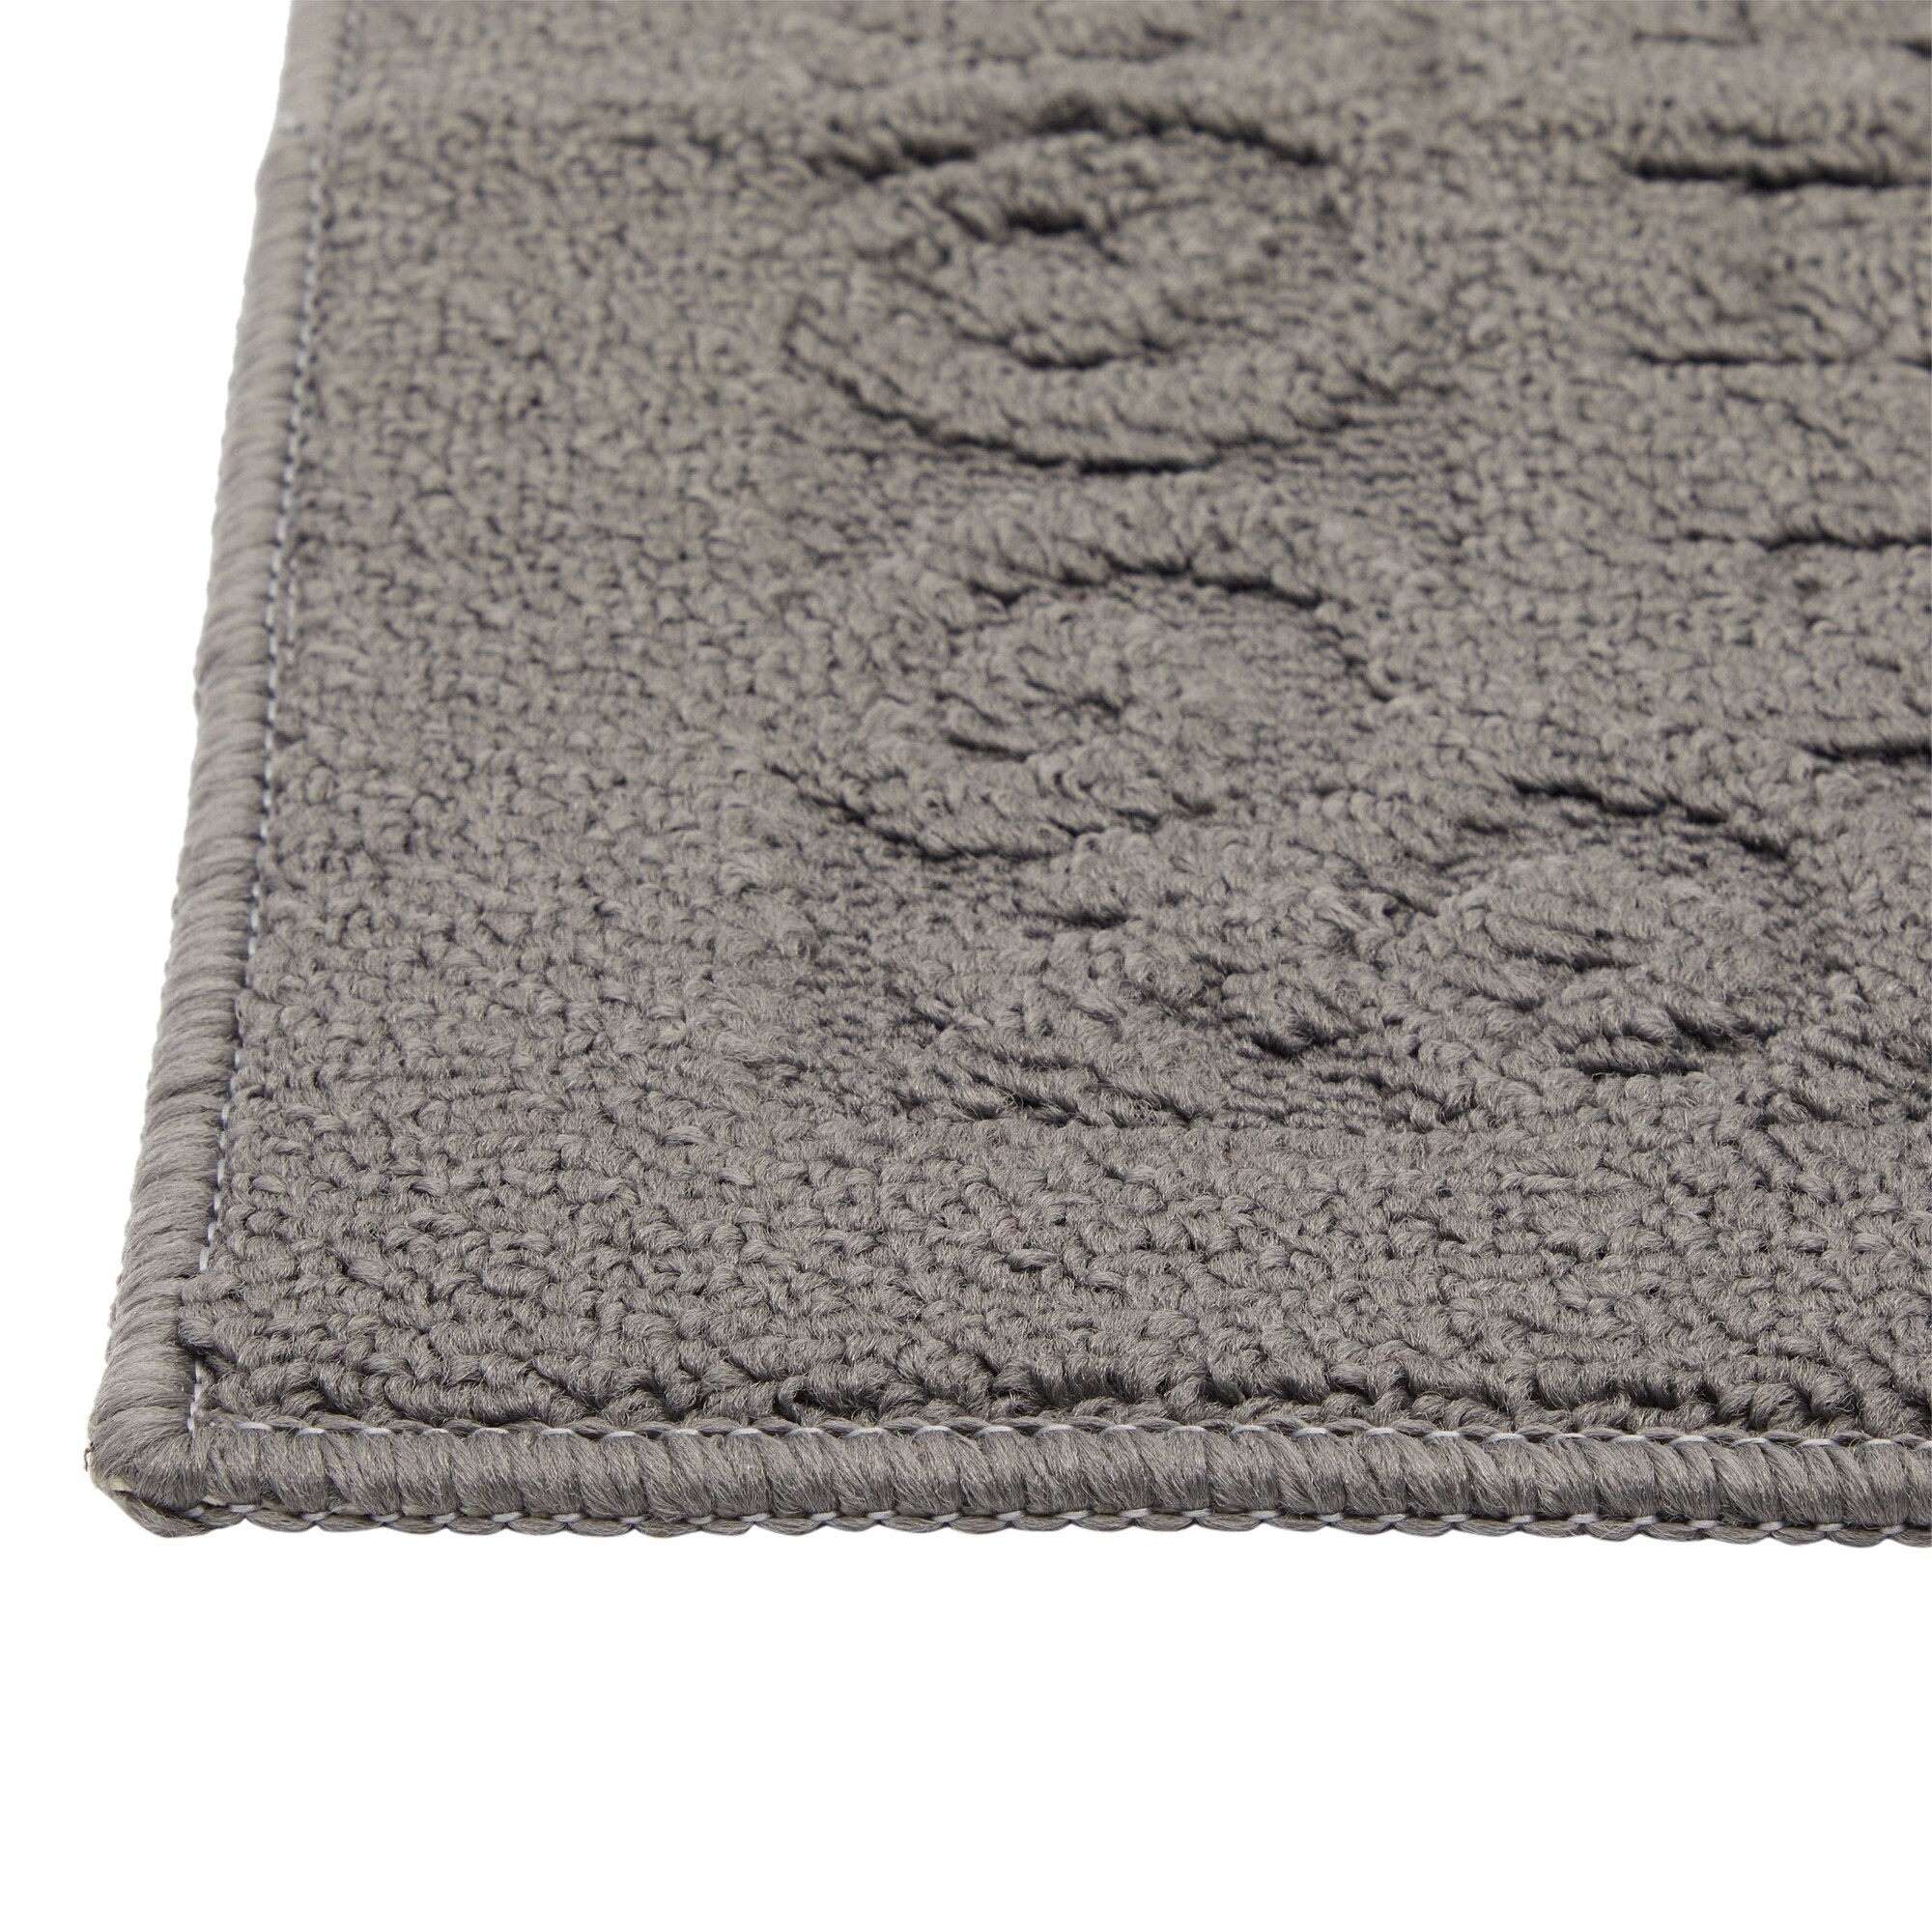 https://ak1.ostkcdn.com/images/products/is/images/direct/684972f435e4e071aee6c2514df0d0b9156d2c27/Grey-Rubber-Backed-Rug%2C-Washable-Long-Kitchen-Mat%C2%A0for-Home-Entryway%C2%A0%2843-x-20-In%29.jpg